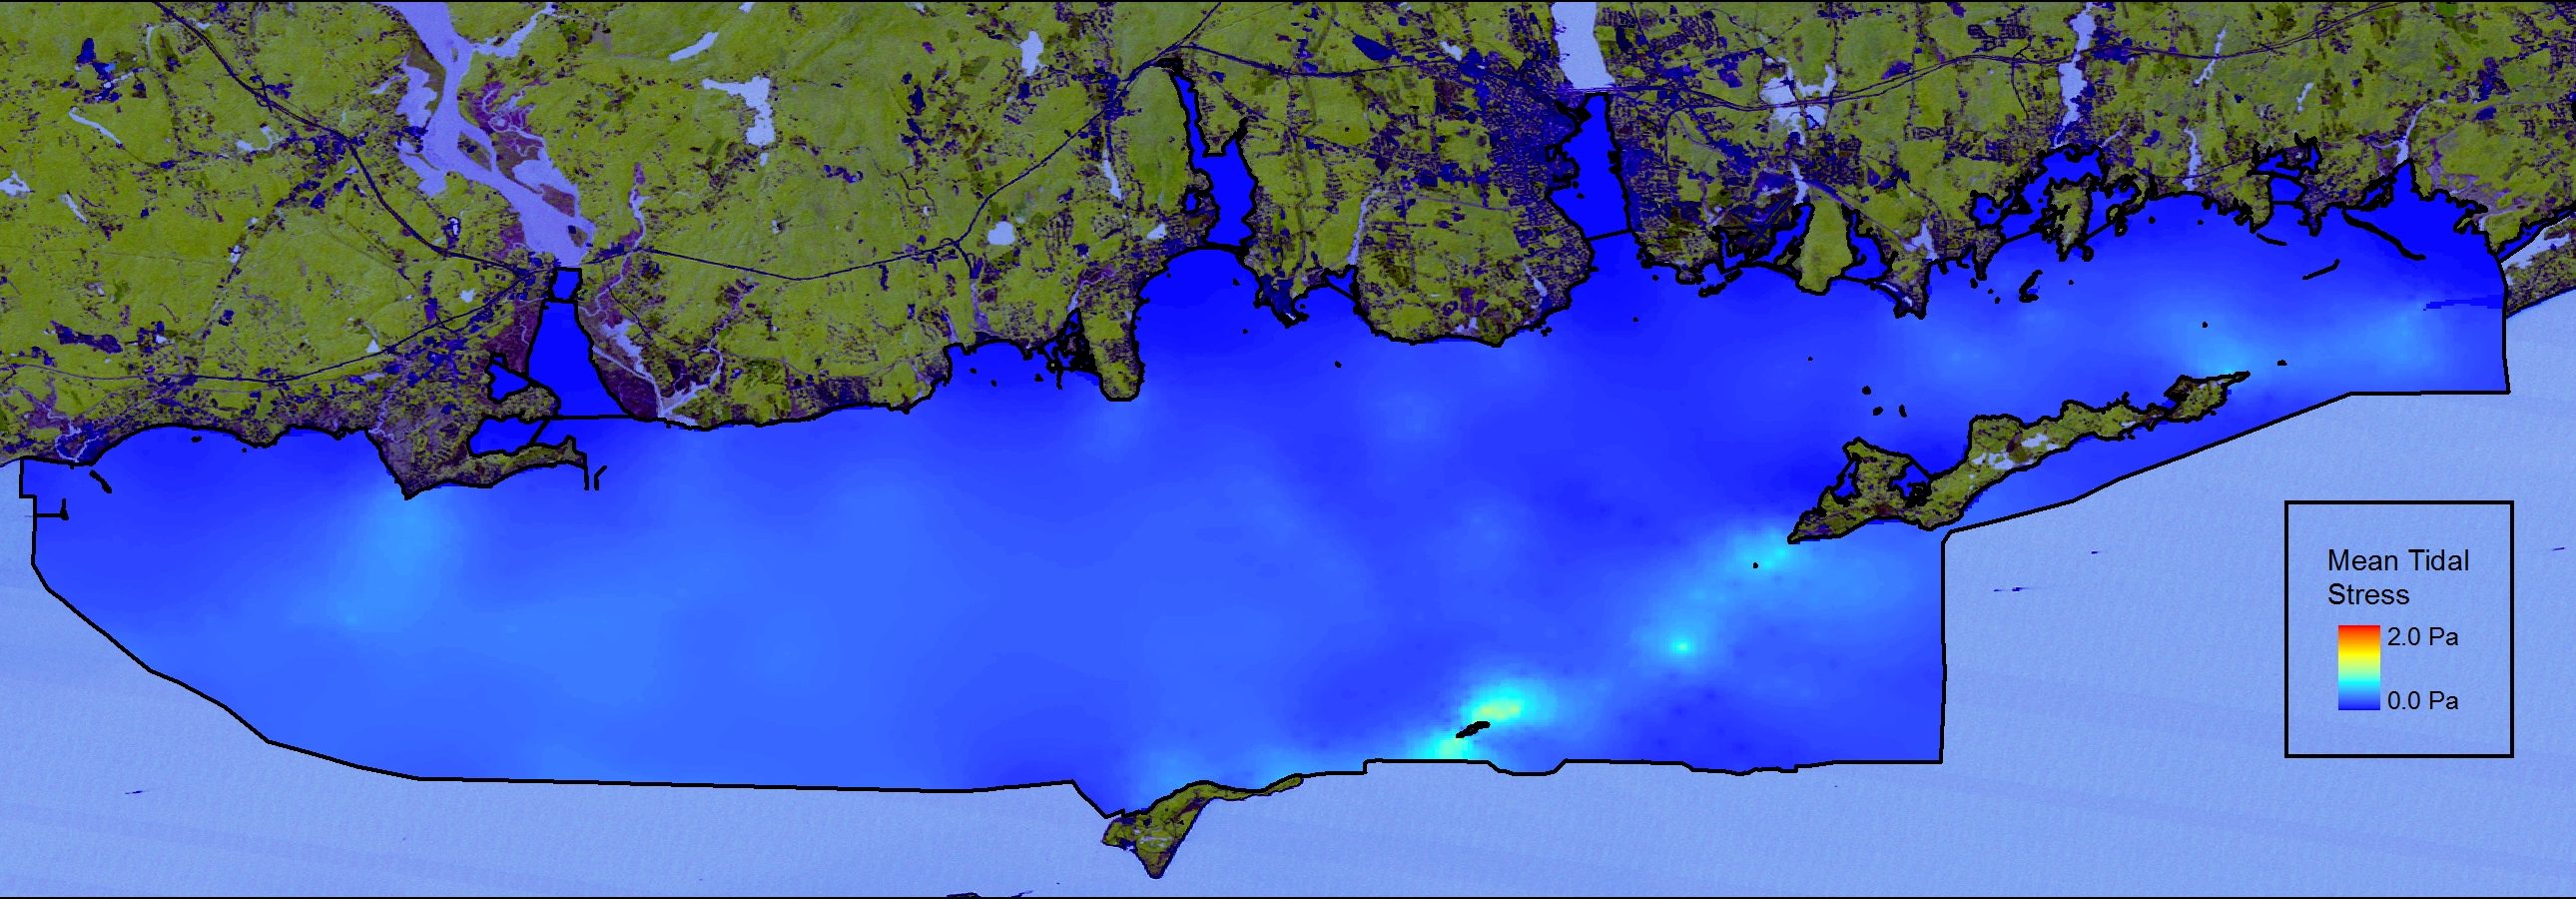 Map of predicted mean tidal bottom stress in the Phase II area